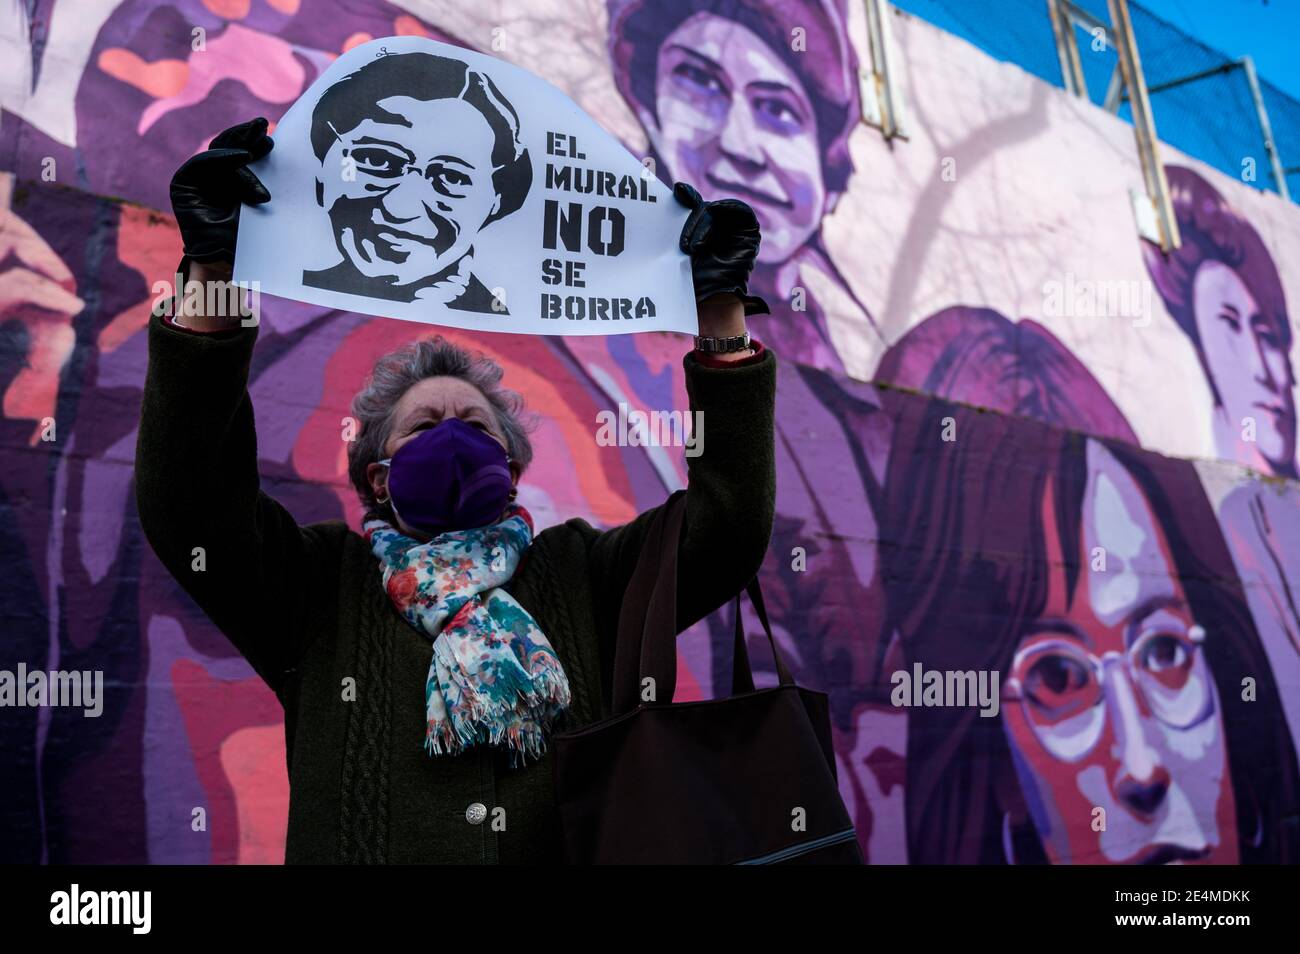 A woman holds a placard with the picture of Rosa Parks and the words 'the mural should not be erased', during a protest against the removal proposed by far-right party VOX of a feminist mural named 'Union makes force'. In the mural appear the faces of 15 women who are part of history for their fight in favor of equality: Angela Davis, Frida Kahlo, Nina Simone, Rigoberta Menchu, Lucia Sanchez Saornil, Rosa Arauzo, Valentina Tereshkova, Chimamanda Ngozi, Emma Goldman, Kanno Sugato, Liudmila Pavlichenko, Billy Jean King, Gata Cattana, Rosa Parks, and Comandanta Ramona. Stock Photo